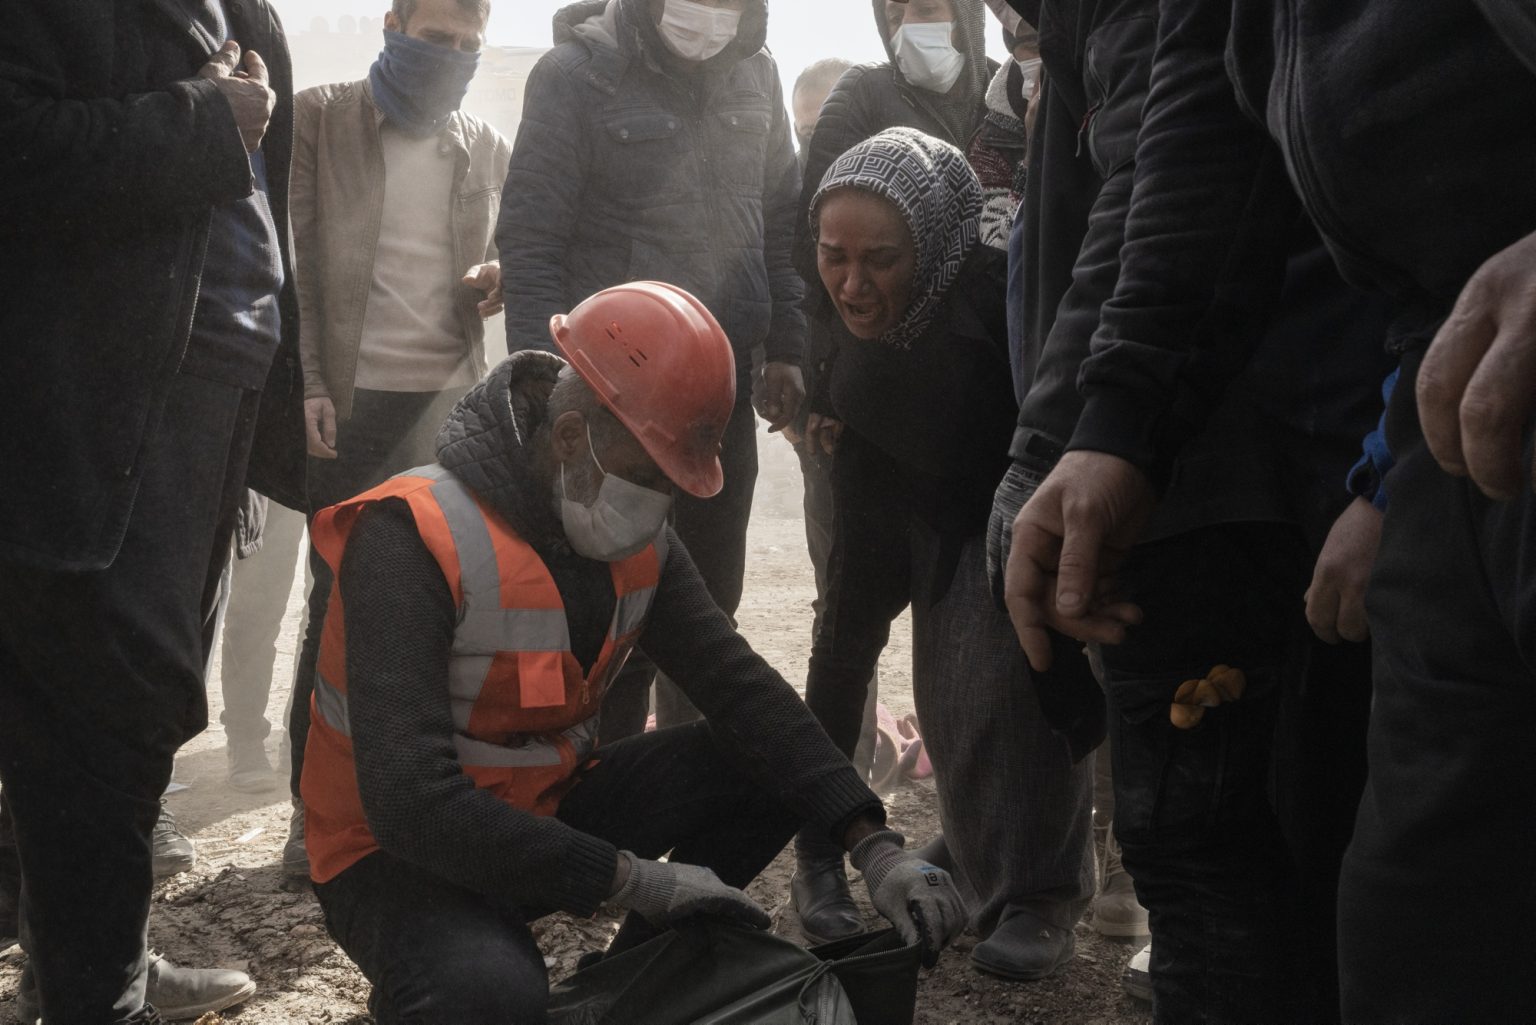 Adiyaman, Turkey, February 2023 - The aftermath of the earthquake that hit southern Turkey and northern Syria. The moment when Sabiha identifies the lifeless body of her brother recovered under the rubble.><
Adiyaman, Turchia, febbraio 2023  Le conseguenze del terremoto che ha colpito la Turchia del Sud e la Siria del nord.